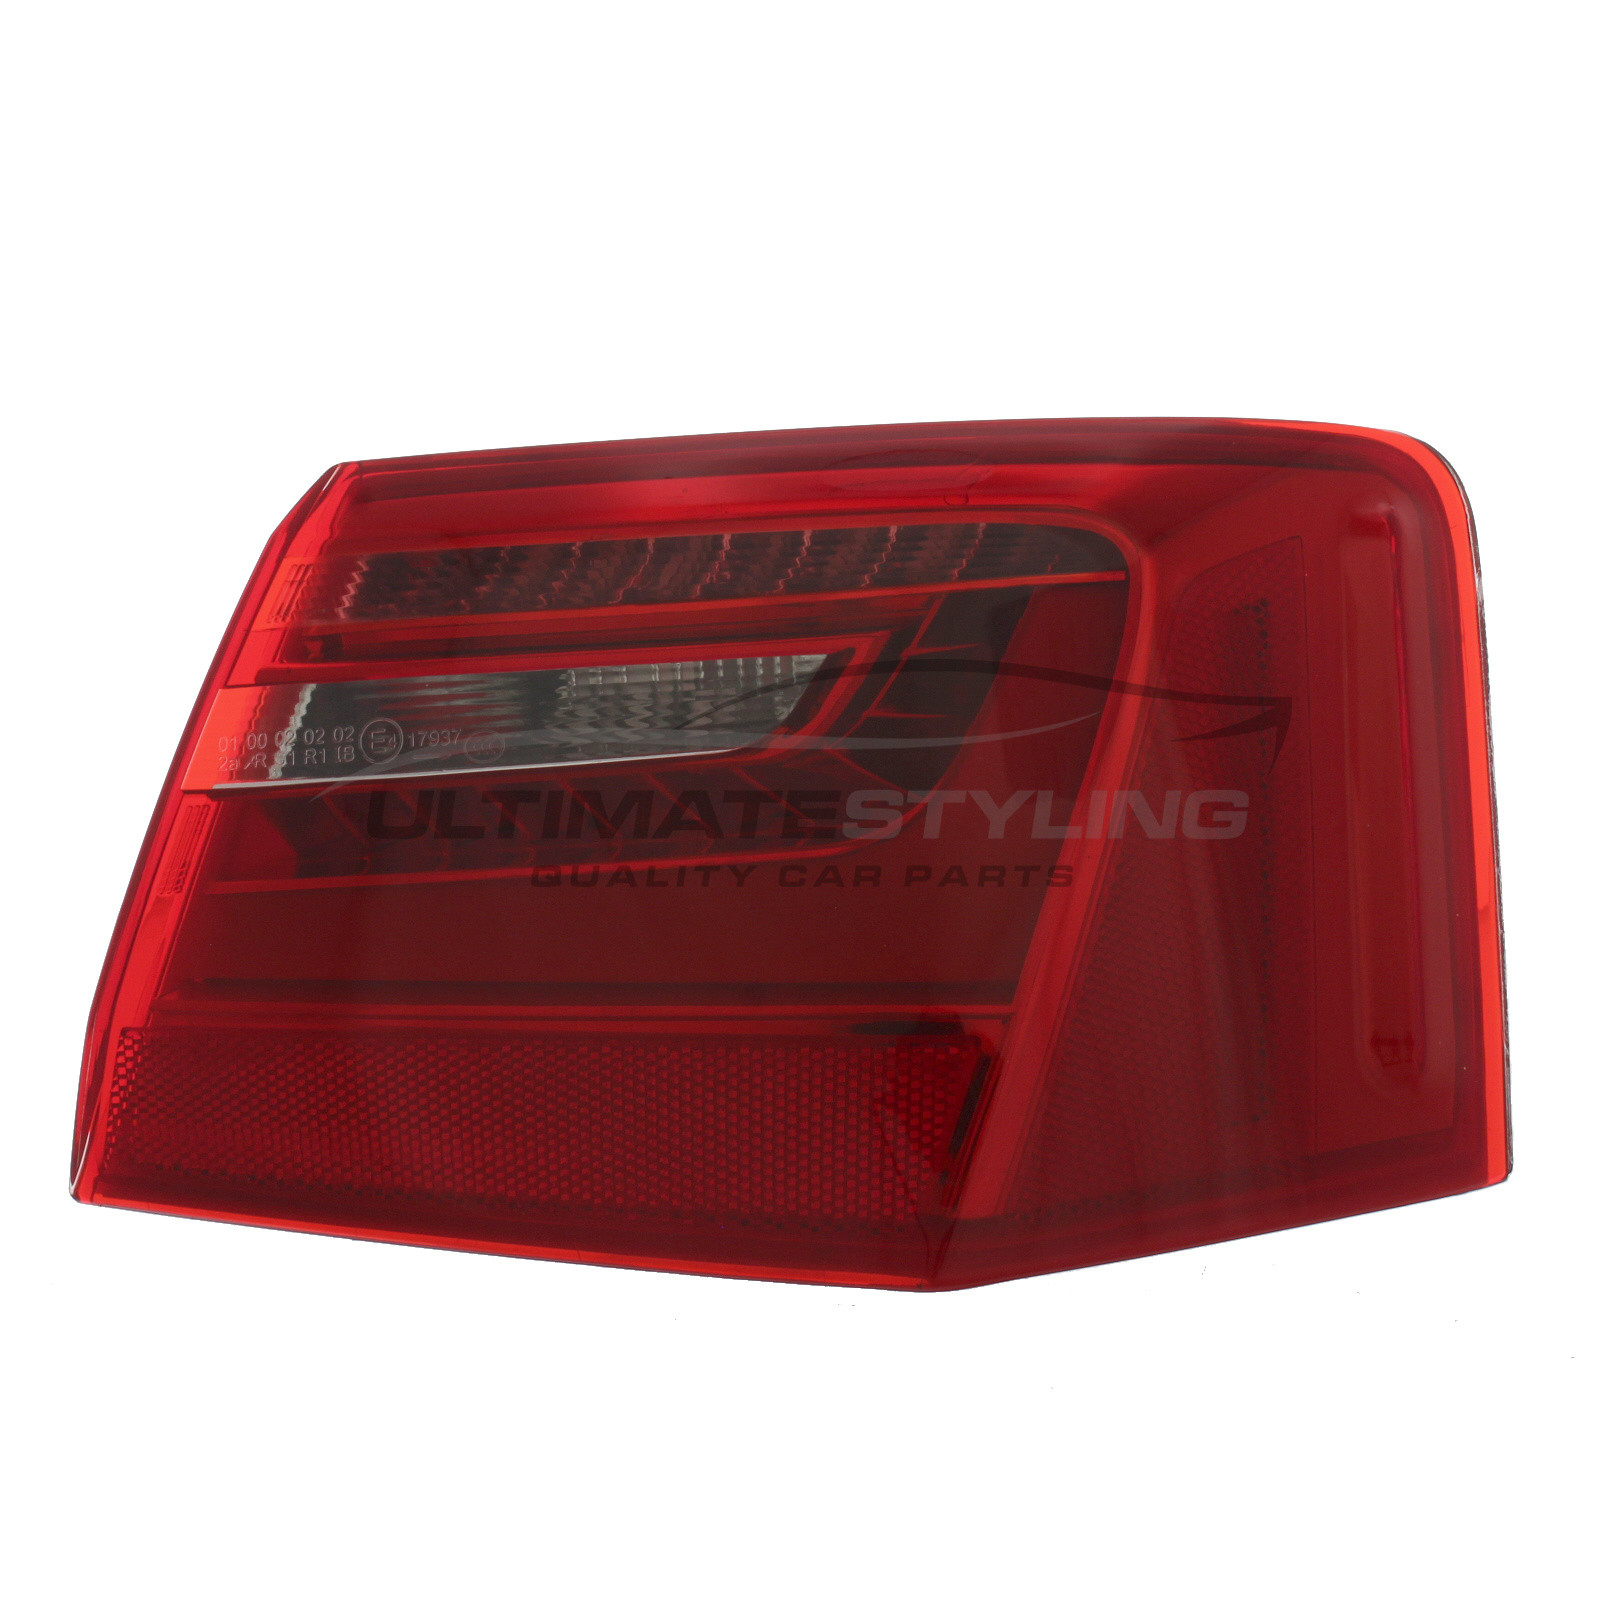 Audi A6 2011-2015 / Audi S6 2012-2015 LED Outer (Wing) Rear Light / Tail Light Including Bulb Holder Drivers Side (RH)